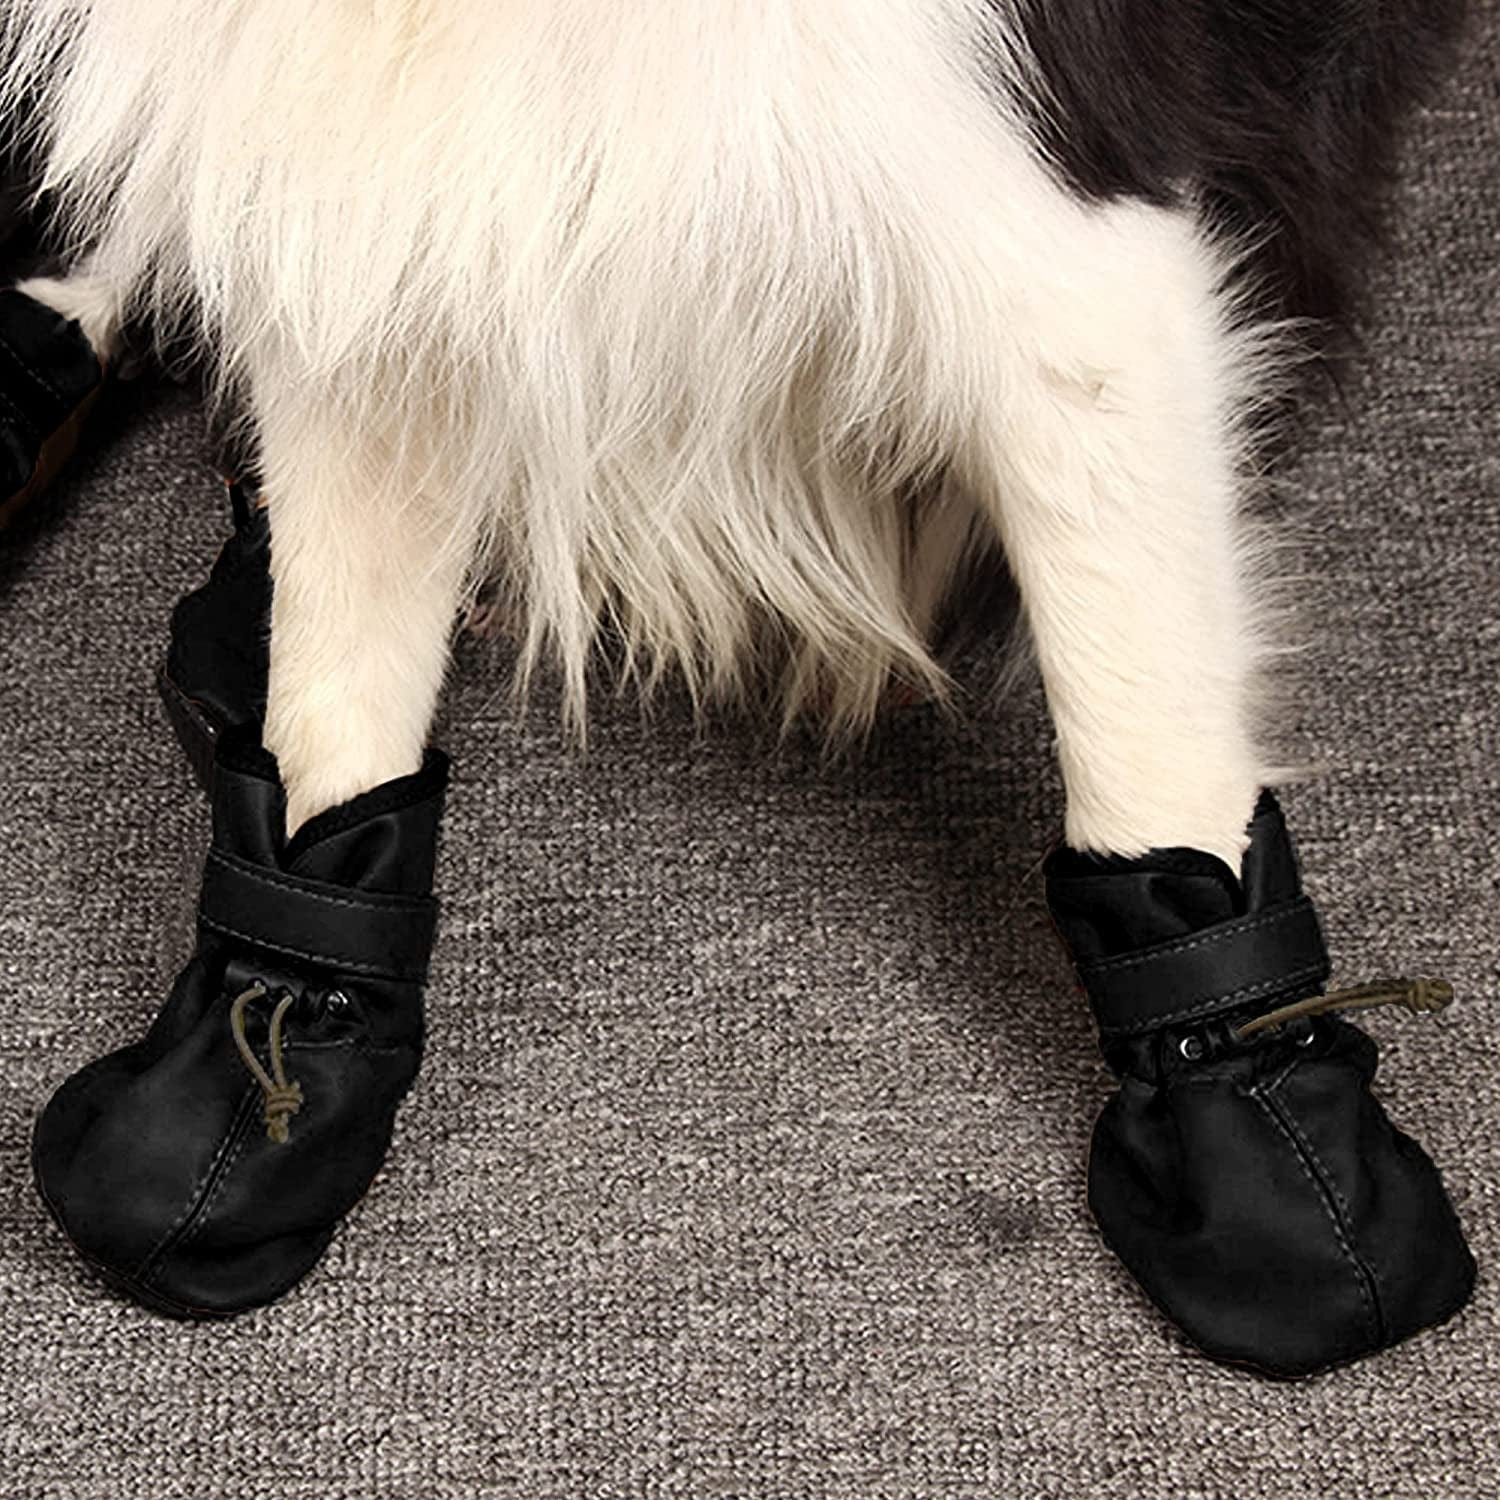 YAODHAOD Dog Shoes for Large Dogs, Dog Boots Paw Protectors for Hot Pavement, Leather Anti-Slip Adjustable Booties,For Indoor Hardwood Floor Traction Control & Outdoor Wlaking Hikin (Size 8, Black) Animals & Pet Supplies > Pet Supplies > Dog Supplies > Dog Apparel YAODHAOD   